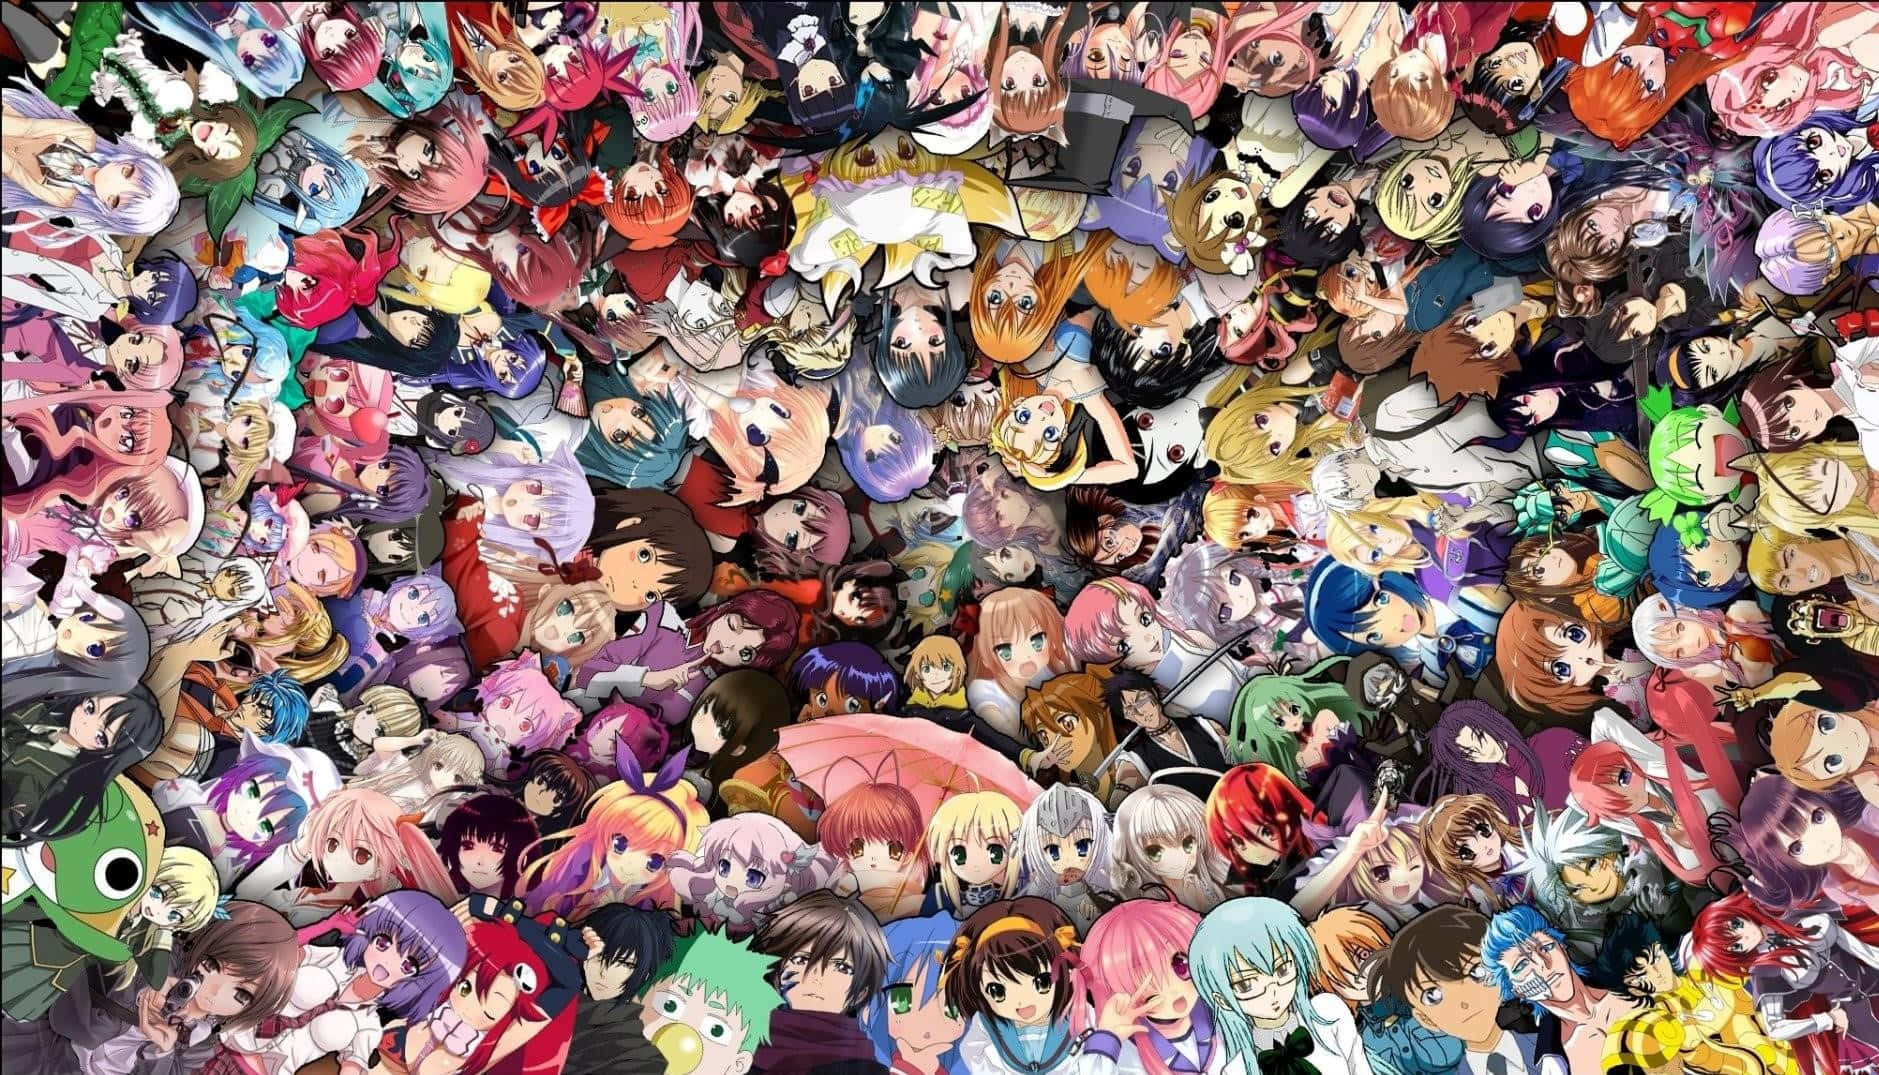 Download Anime Collage 1879 X 1075 Wallpaper Wallpaper | Wallpapers.com